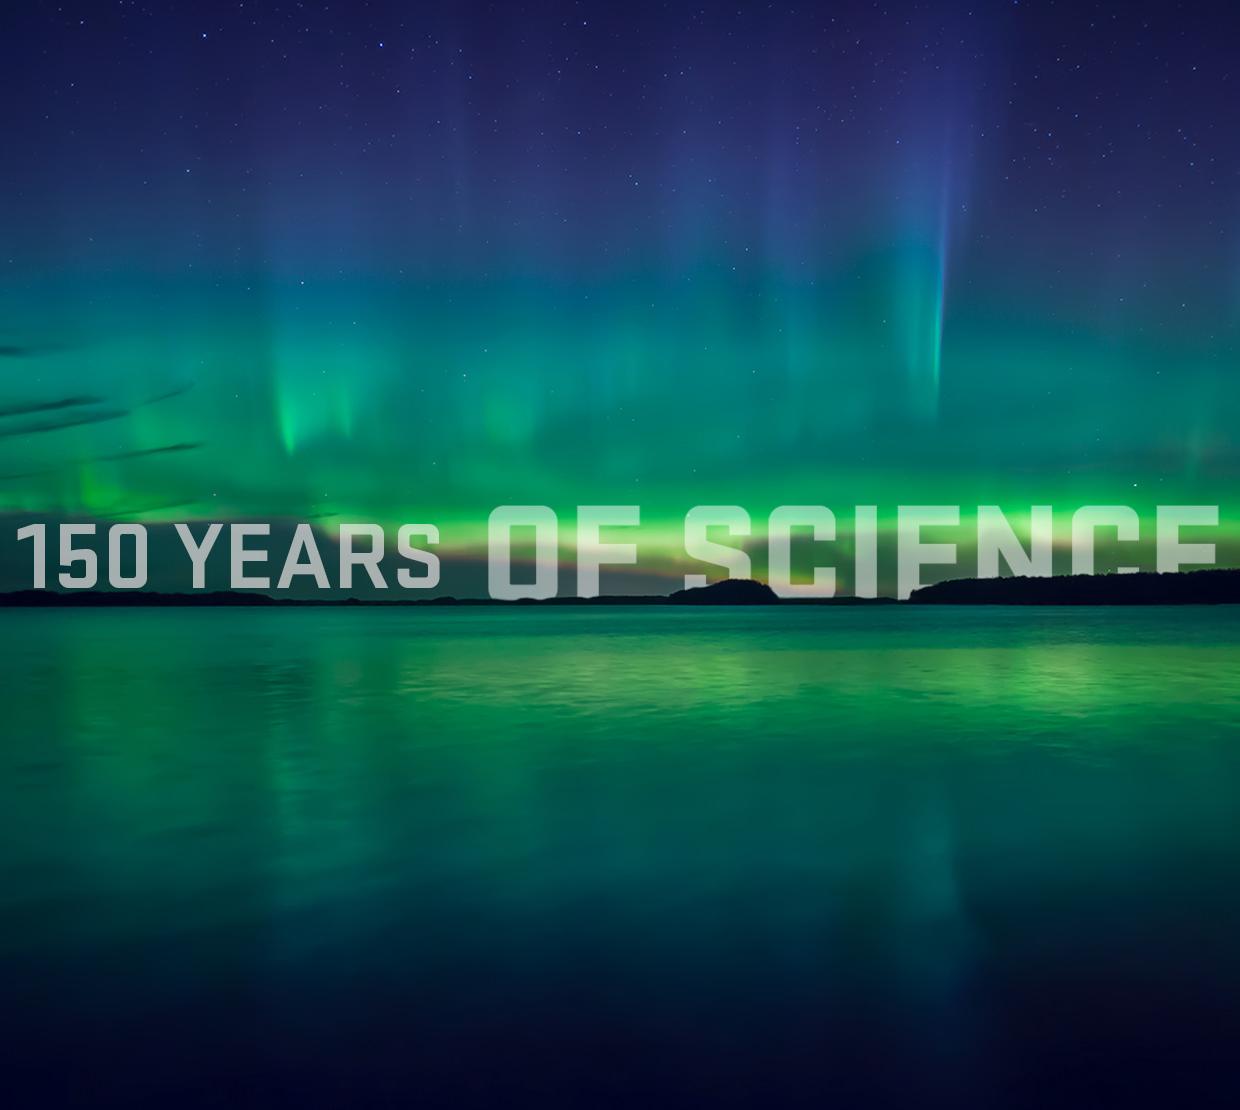 150 years of science title overlaying Northern lights and lake